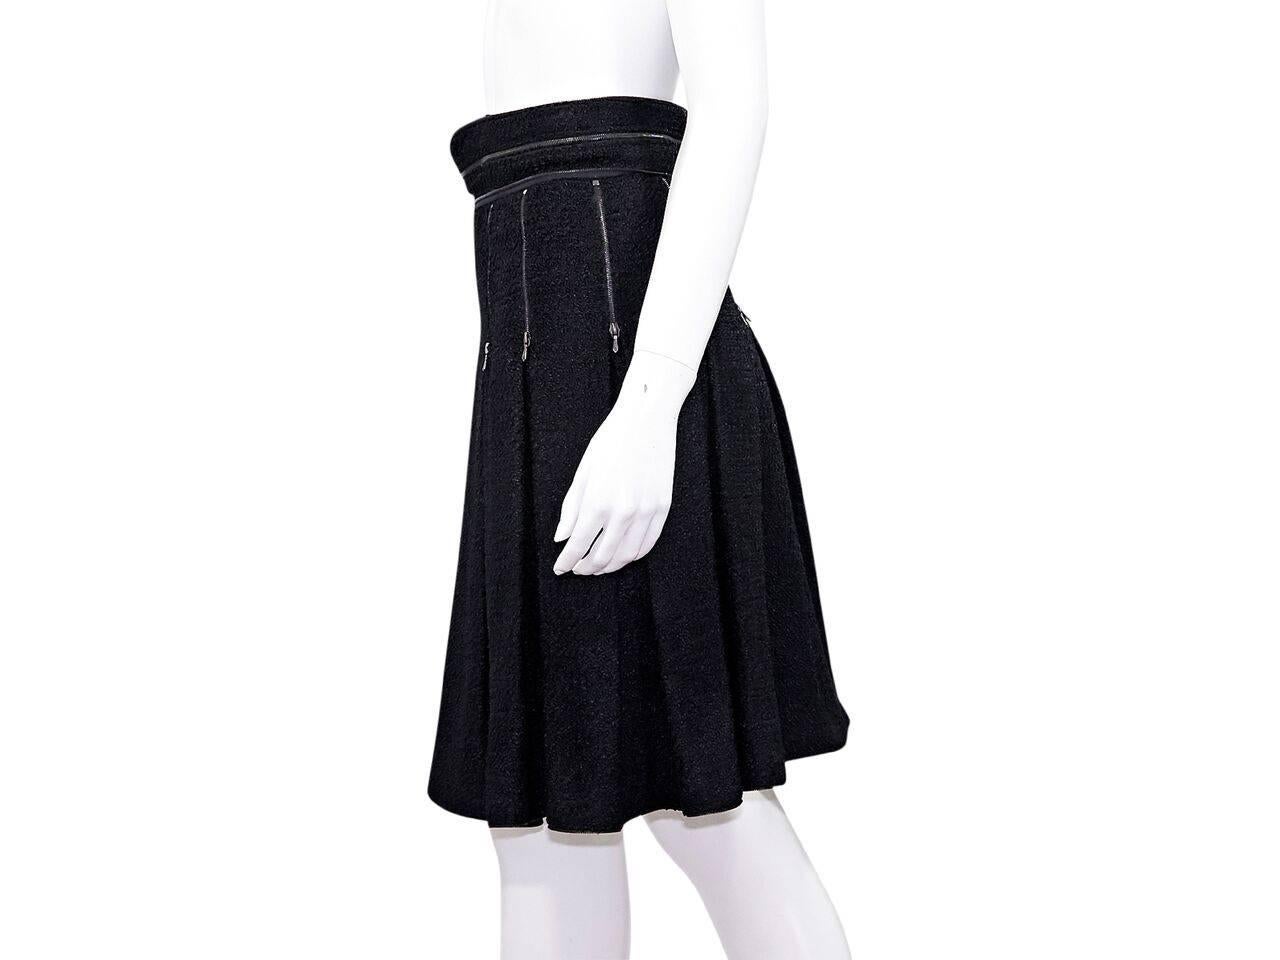 Product details:  Navy blue pleated A-line skirt by Chanel.  Accented with zipper details.  Banded waist.  Side zip closure.  Label size FR 40.
Condition: Pre-owned. Very good.
Est. Retail $ 1,028.00